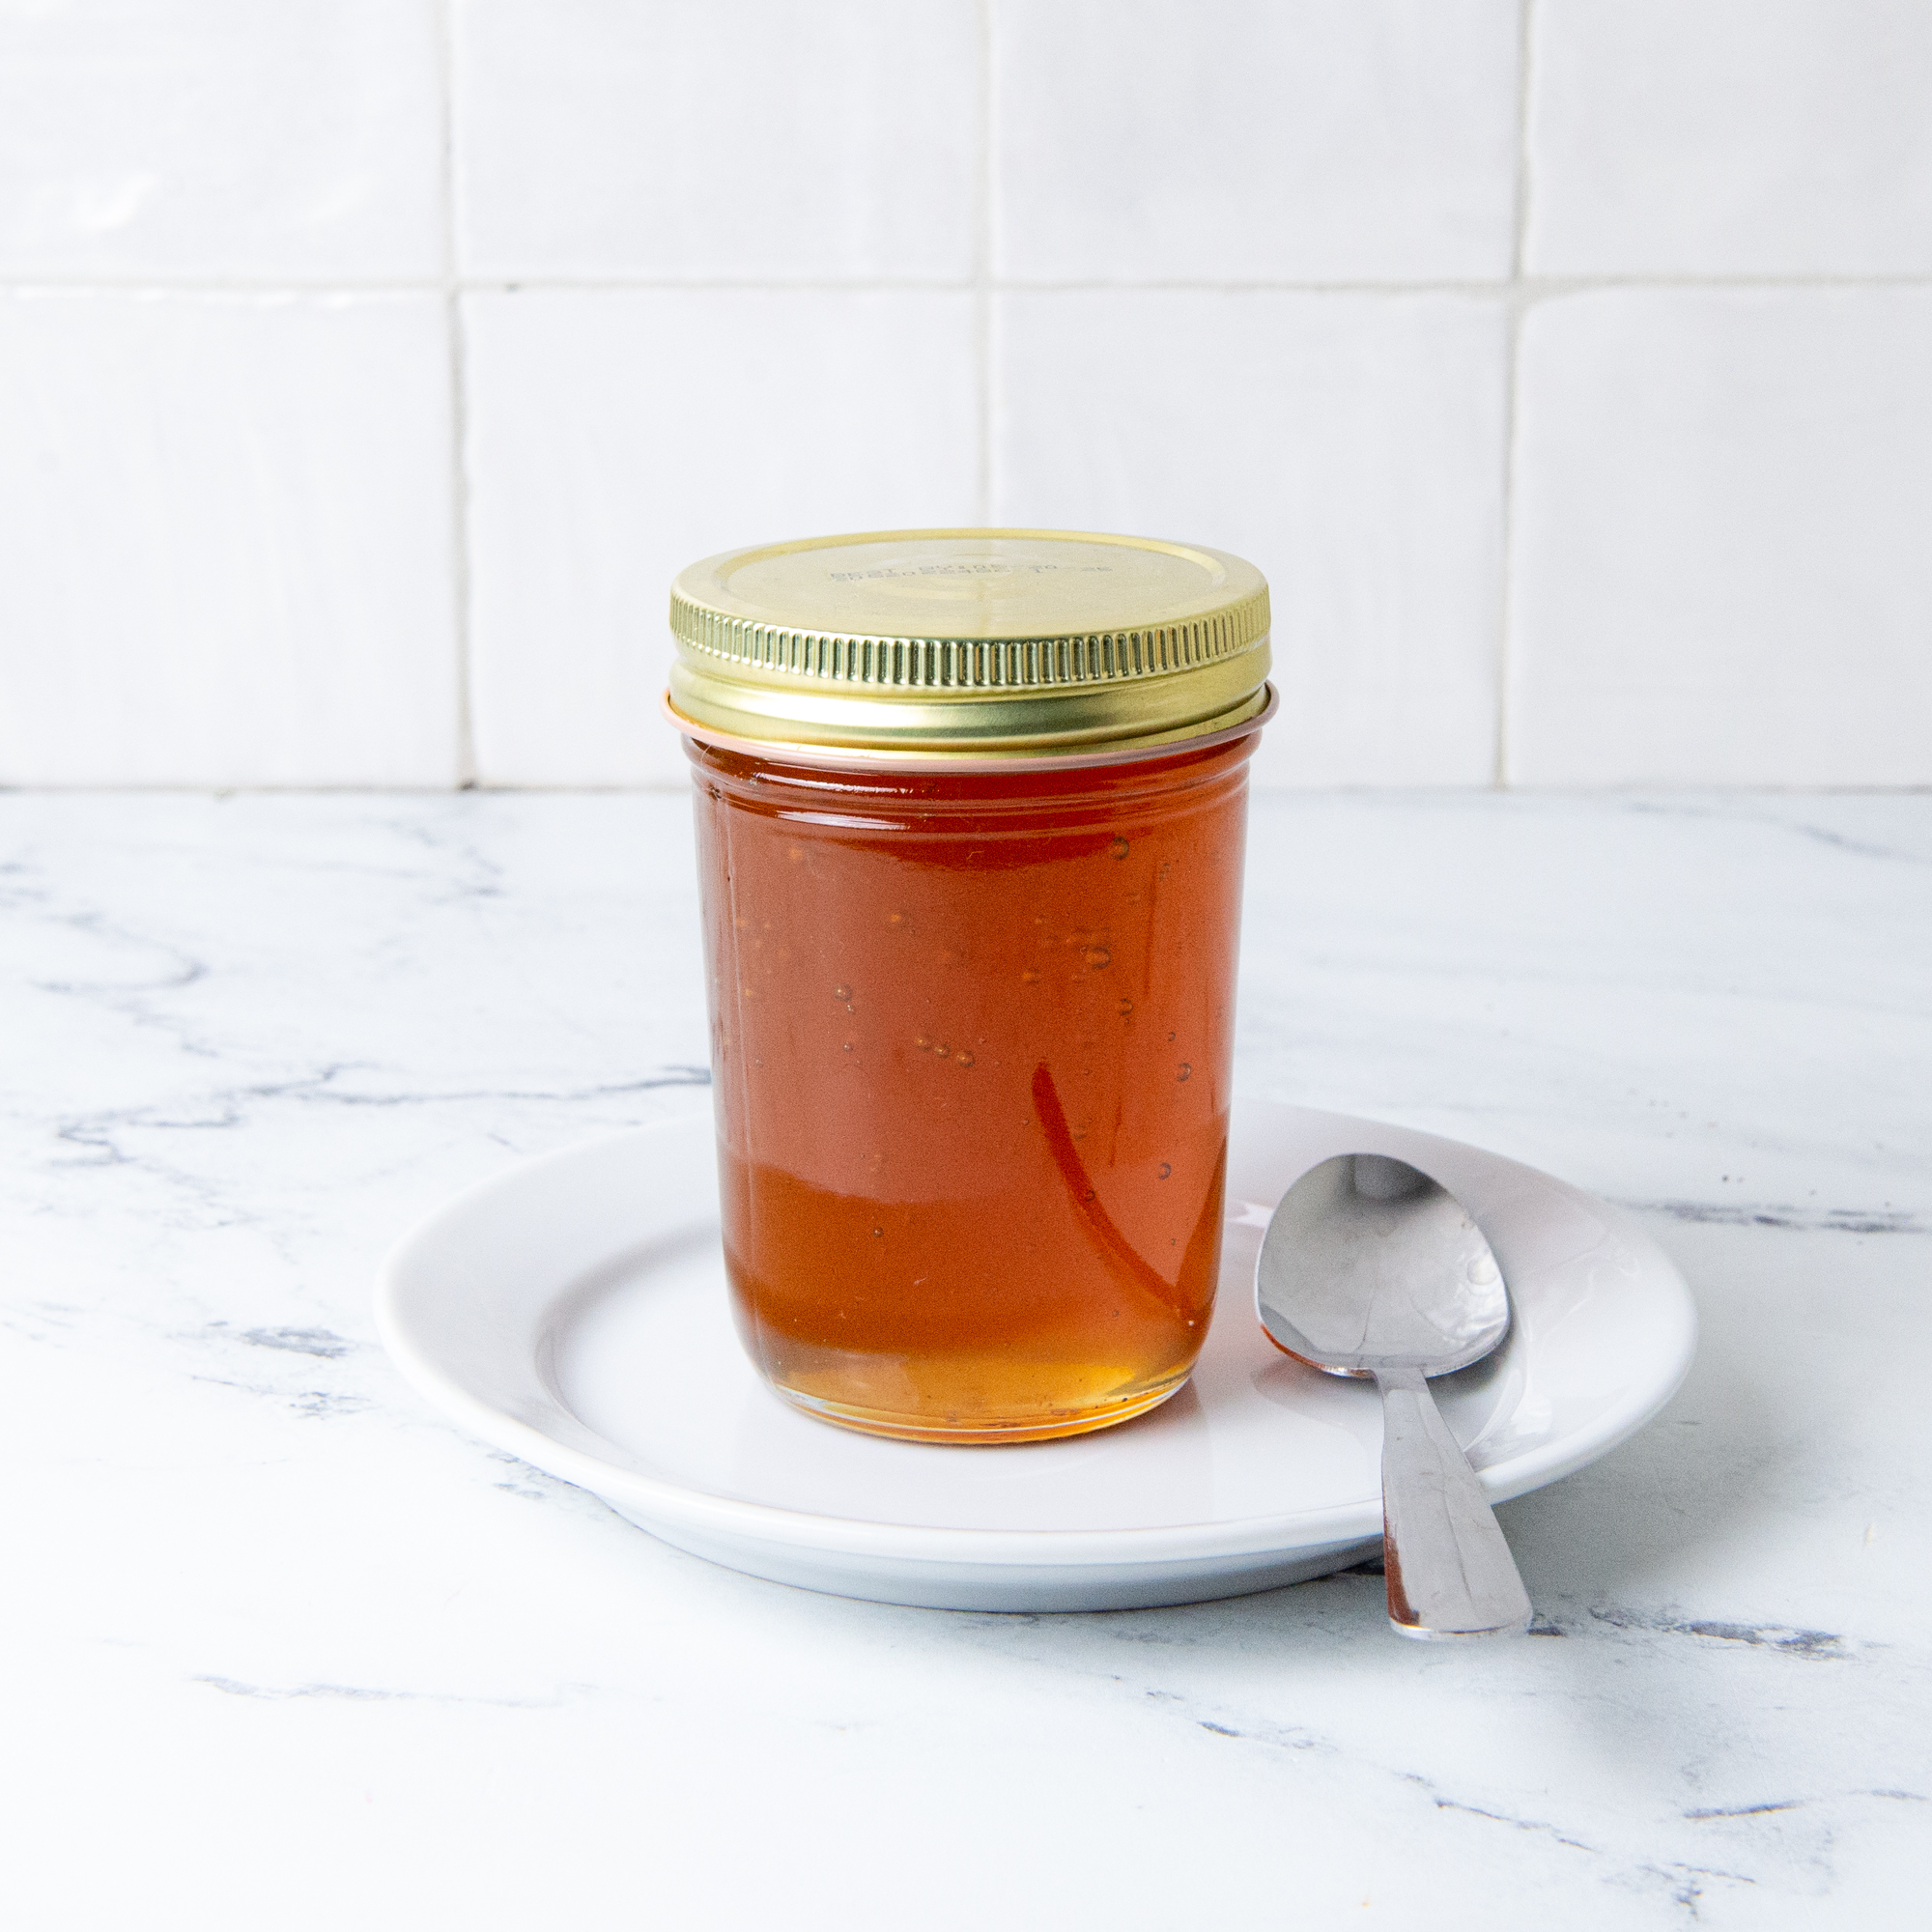 Honey in a clear jar, on a white saucer with a spoon.